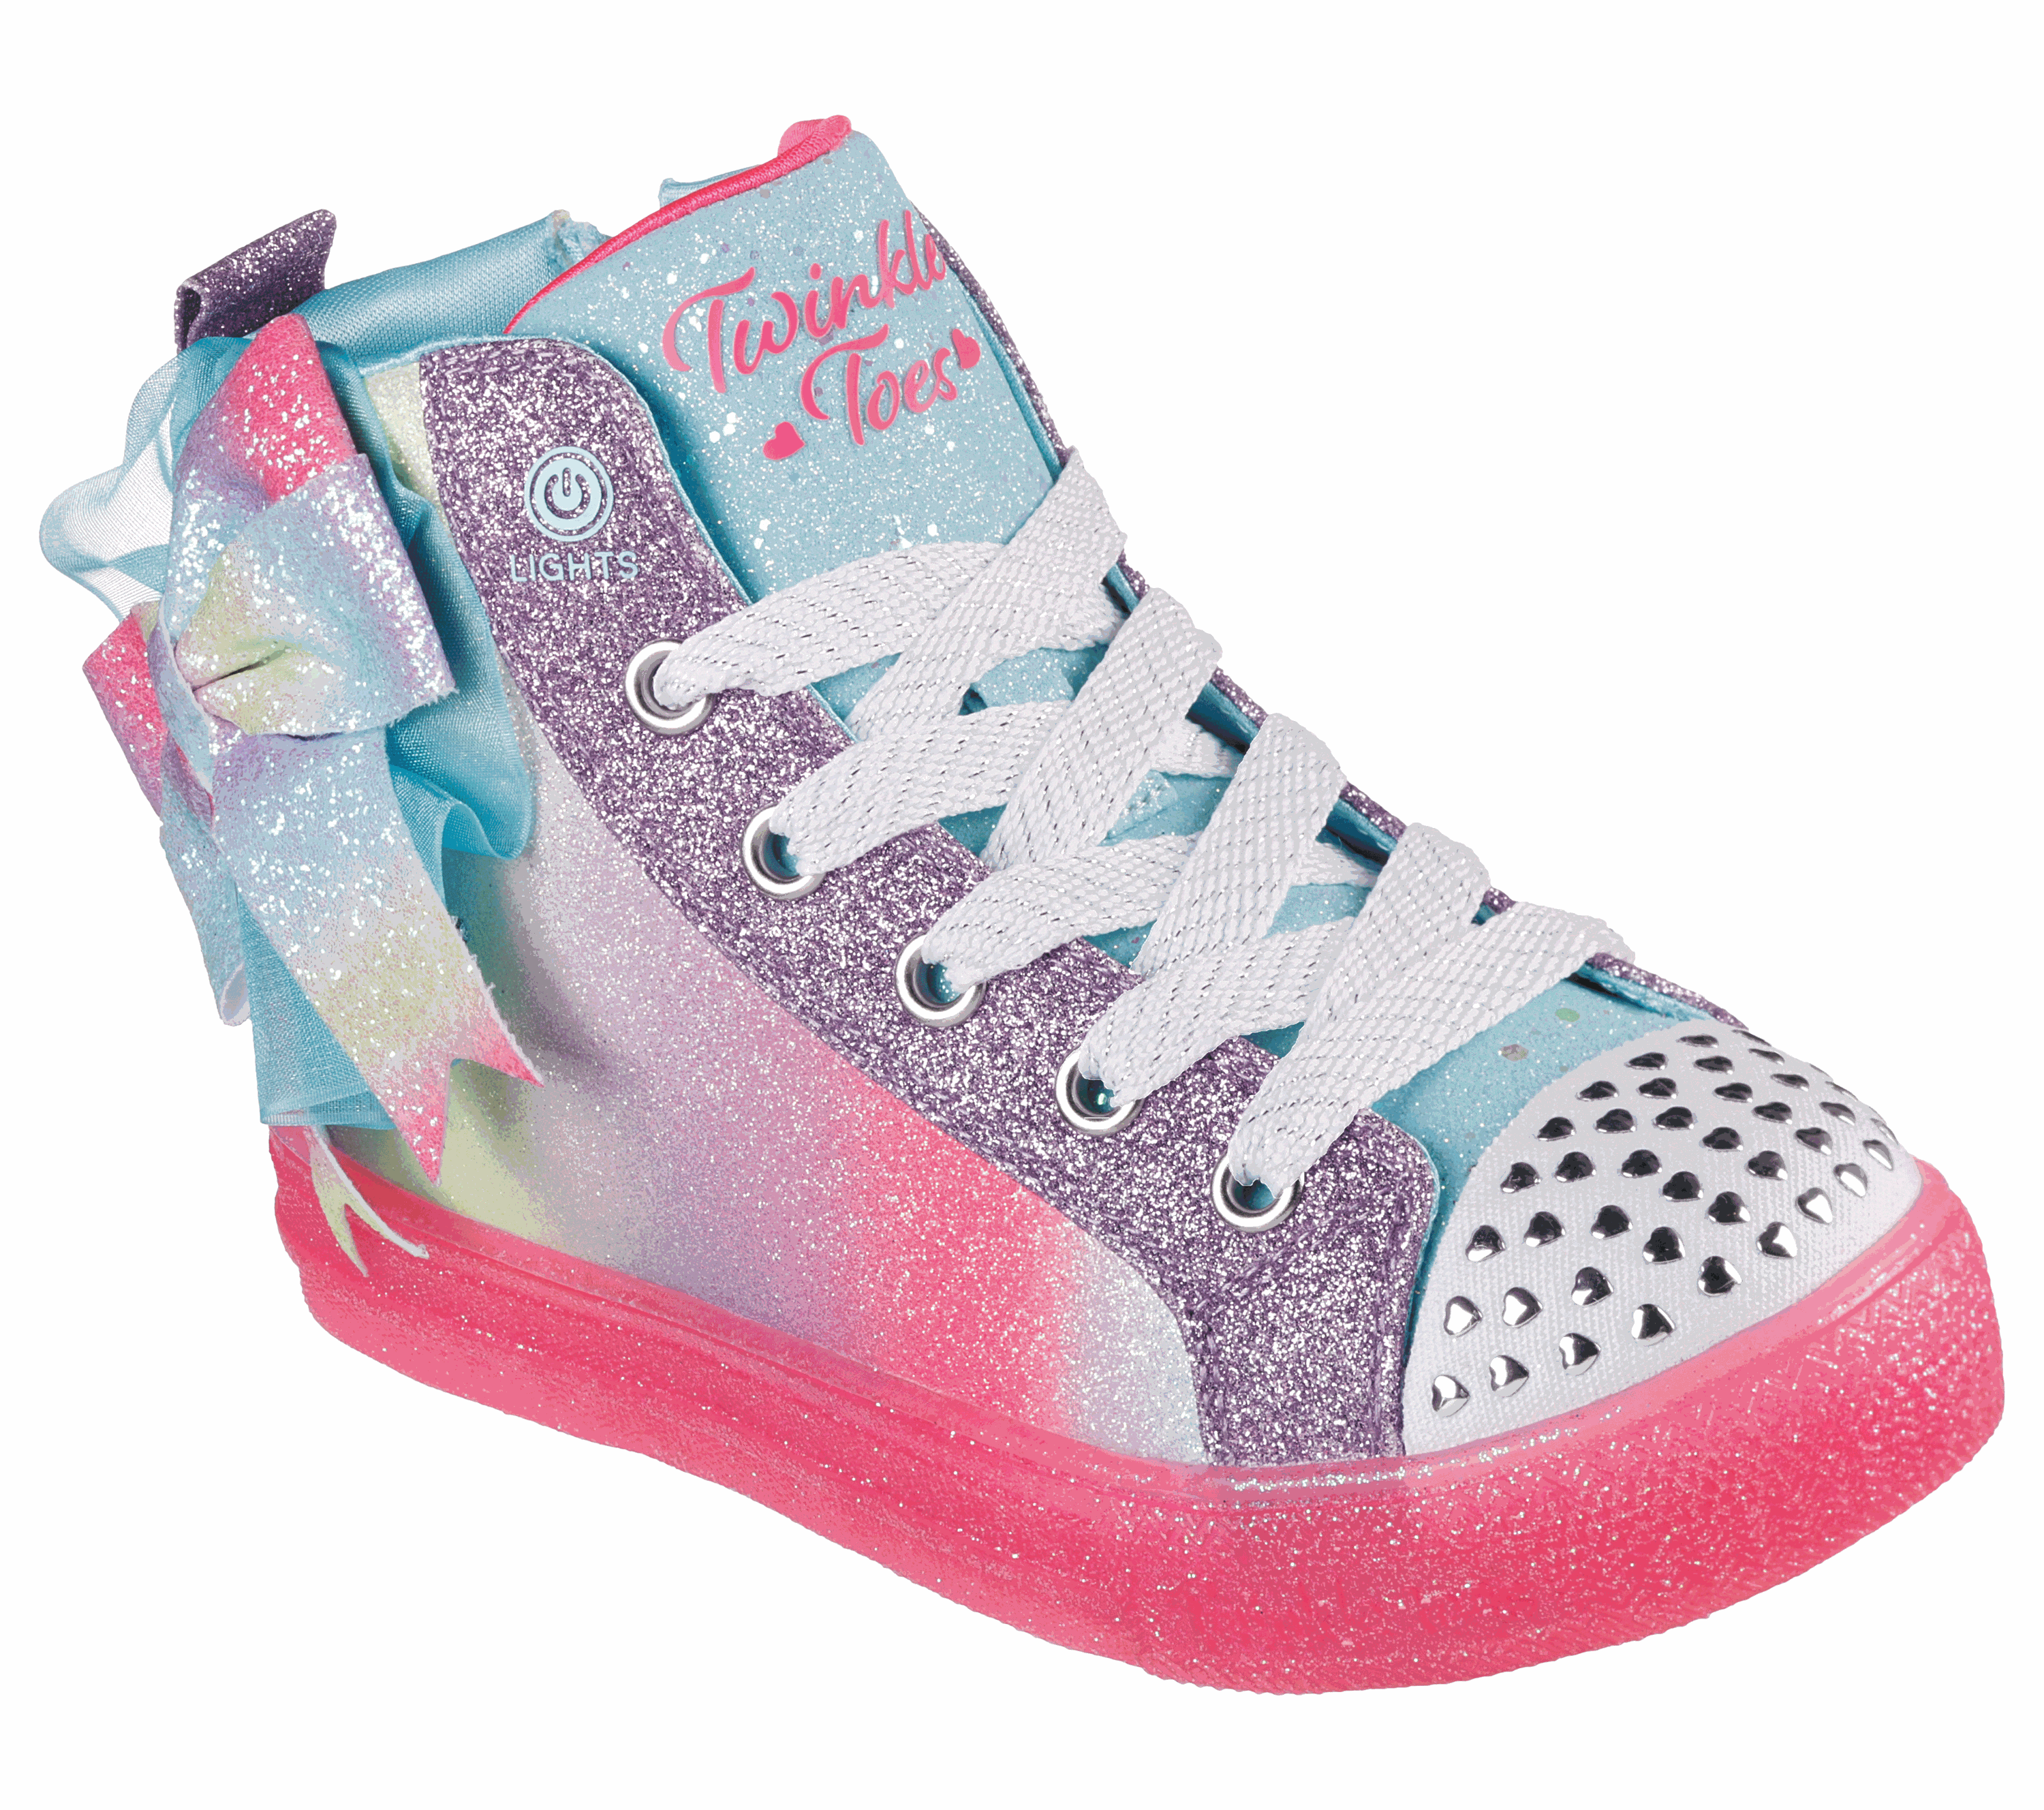 Shop the Twinkle Toes: Shuffle Brights 